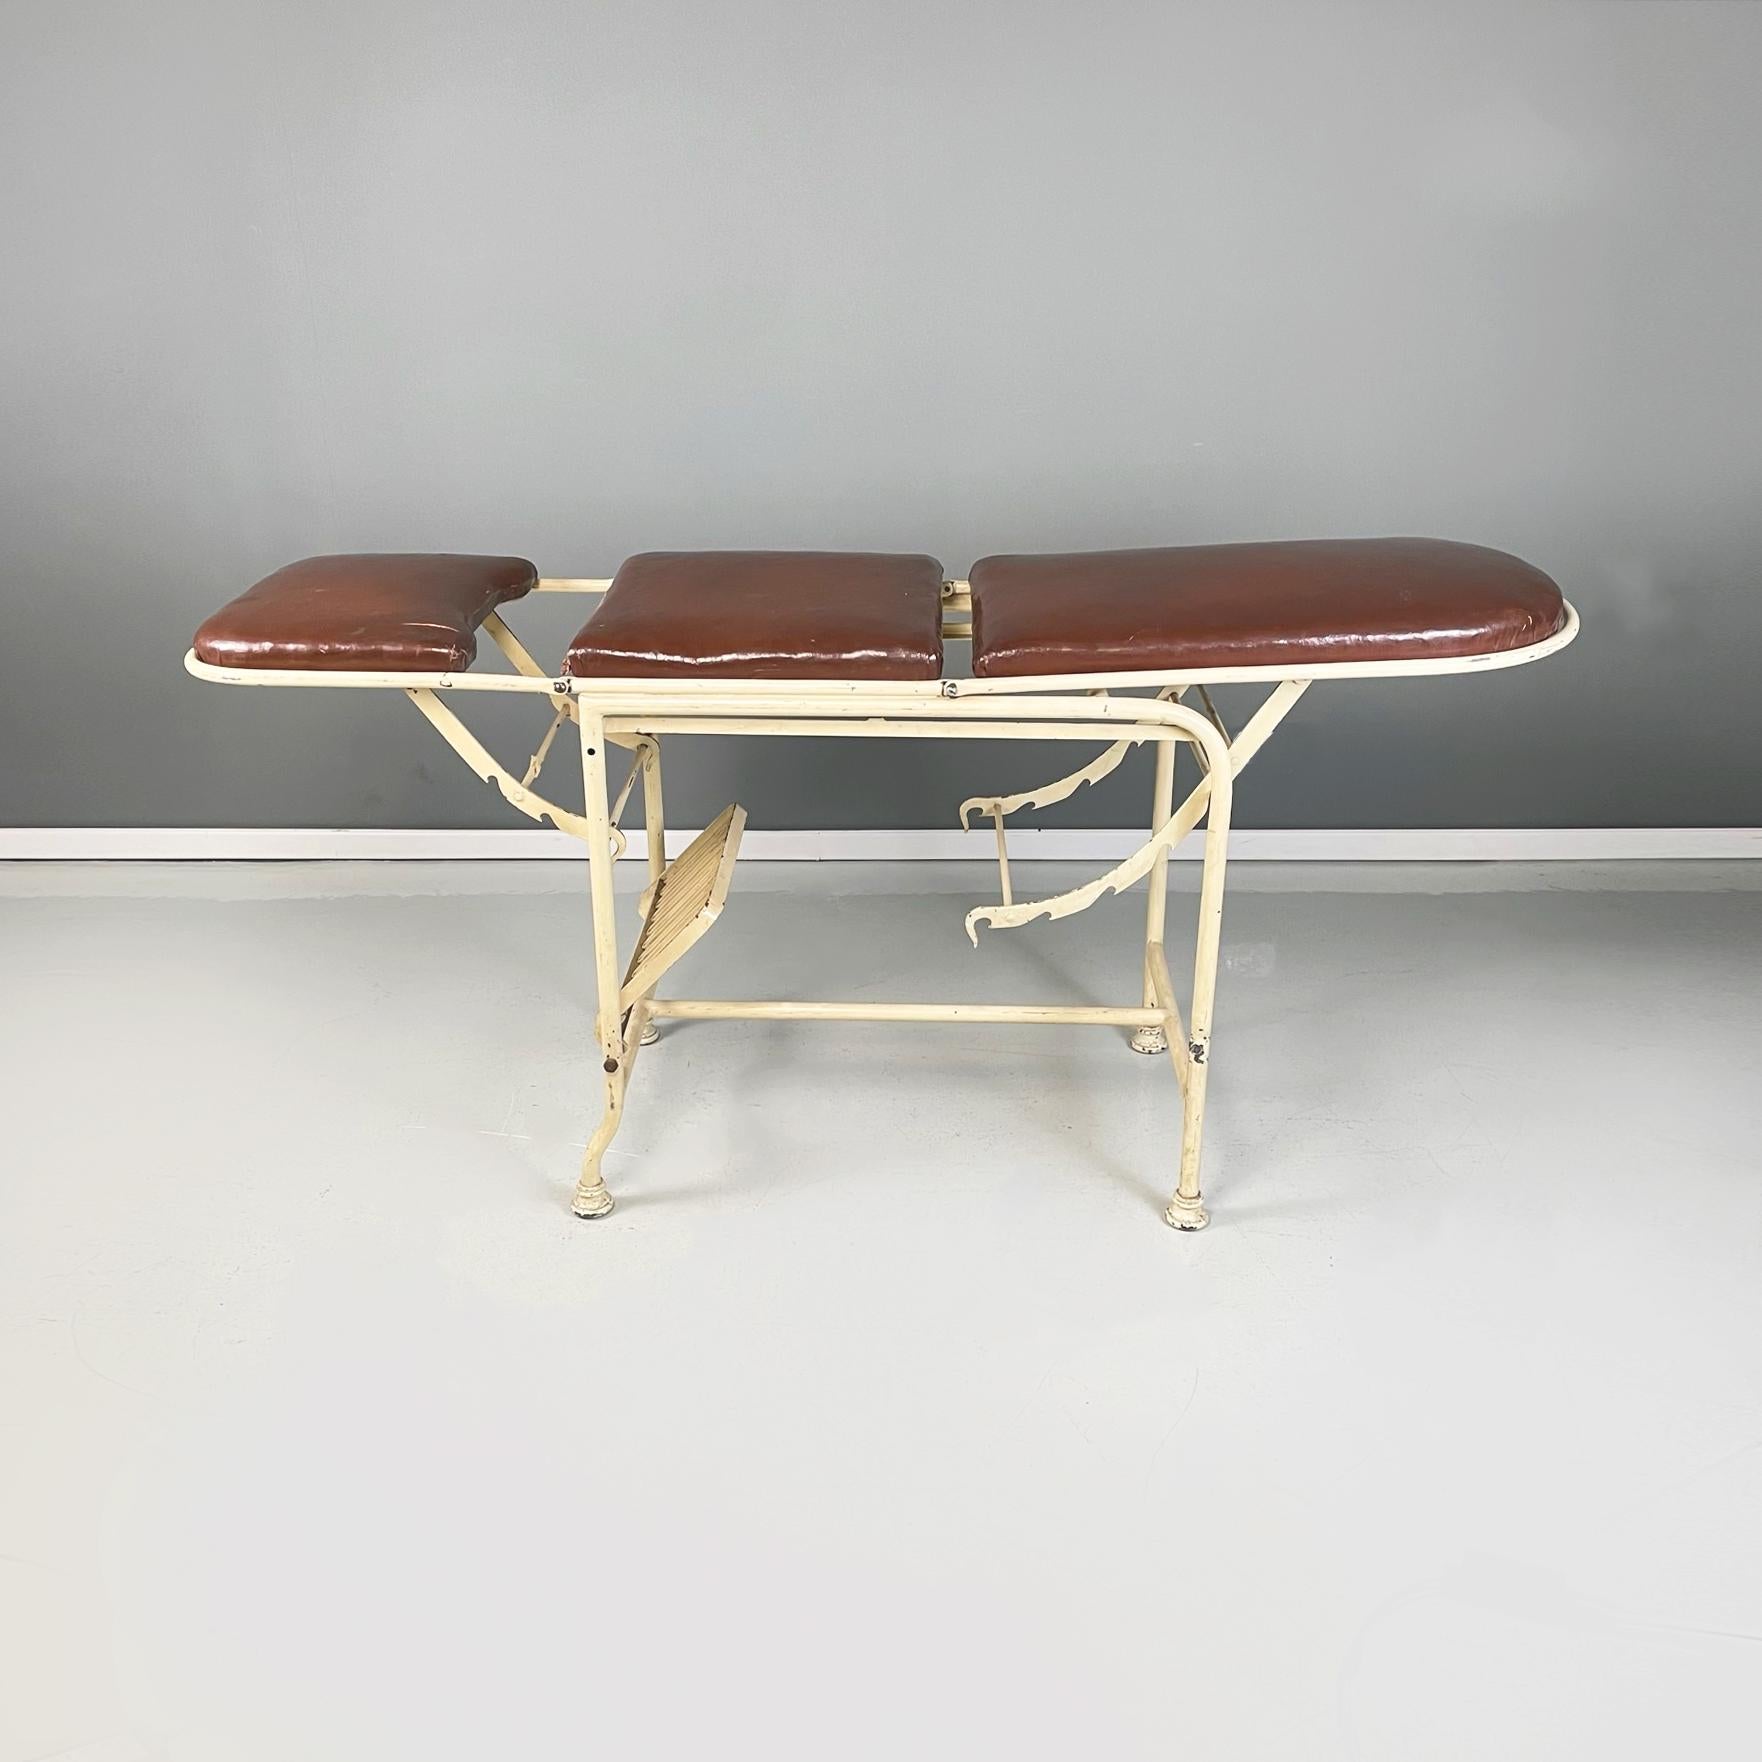 Italian Mid-Century Medical Laboratory Bed Brown Leather and White Metal, 1940s In Good Condition For Sale In MIlano, IT